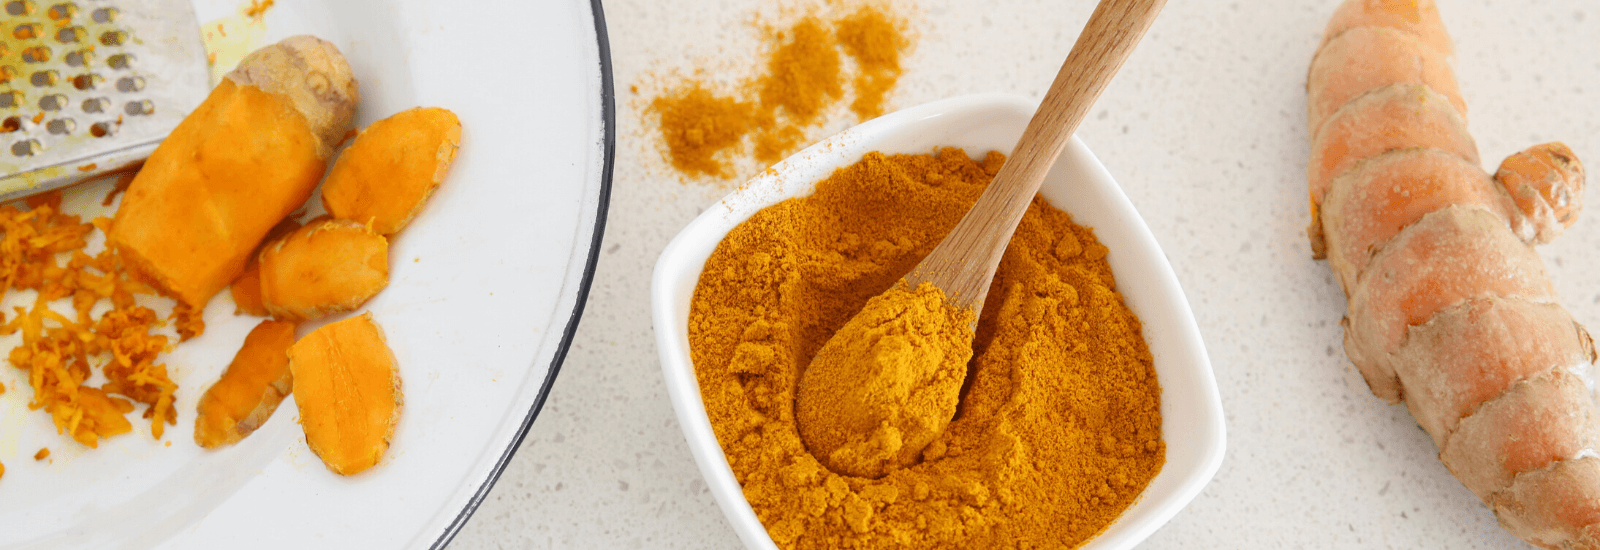 Turmeric The Lifesaver Spice in India